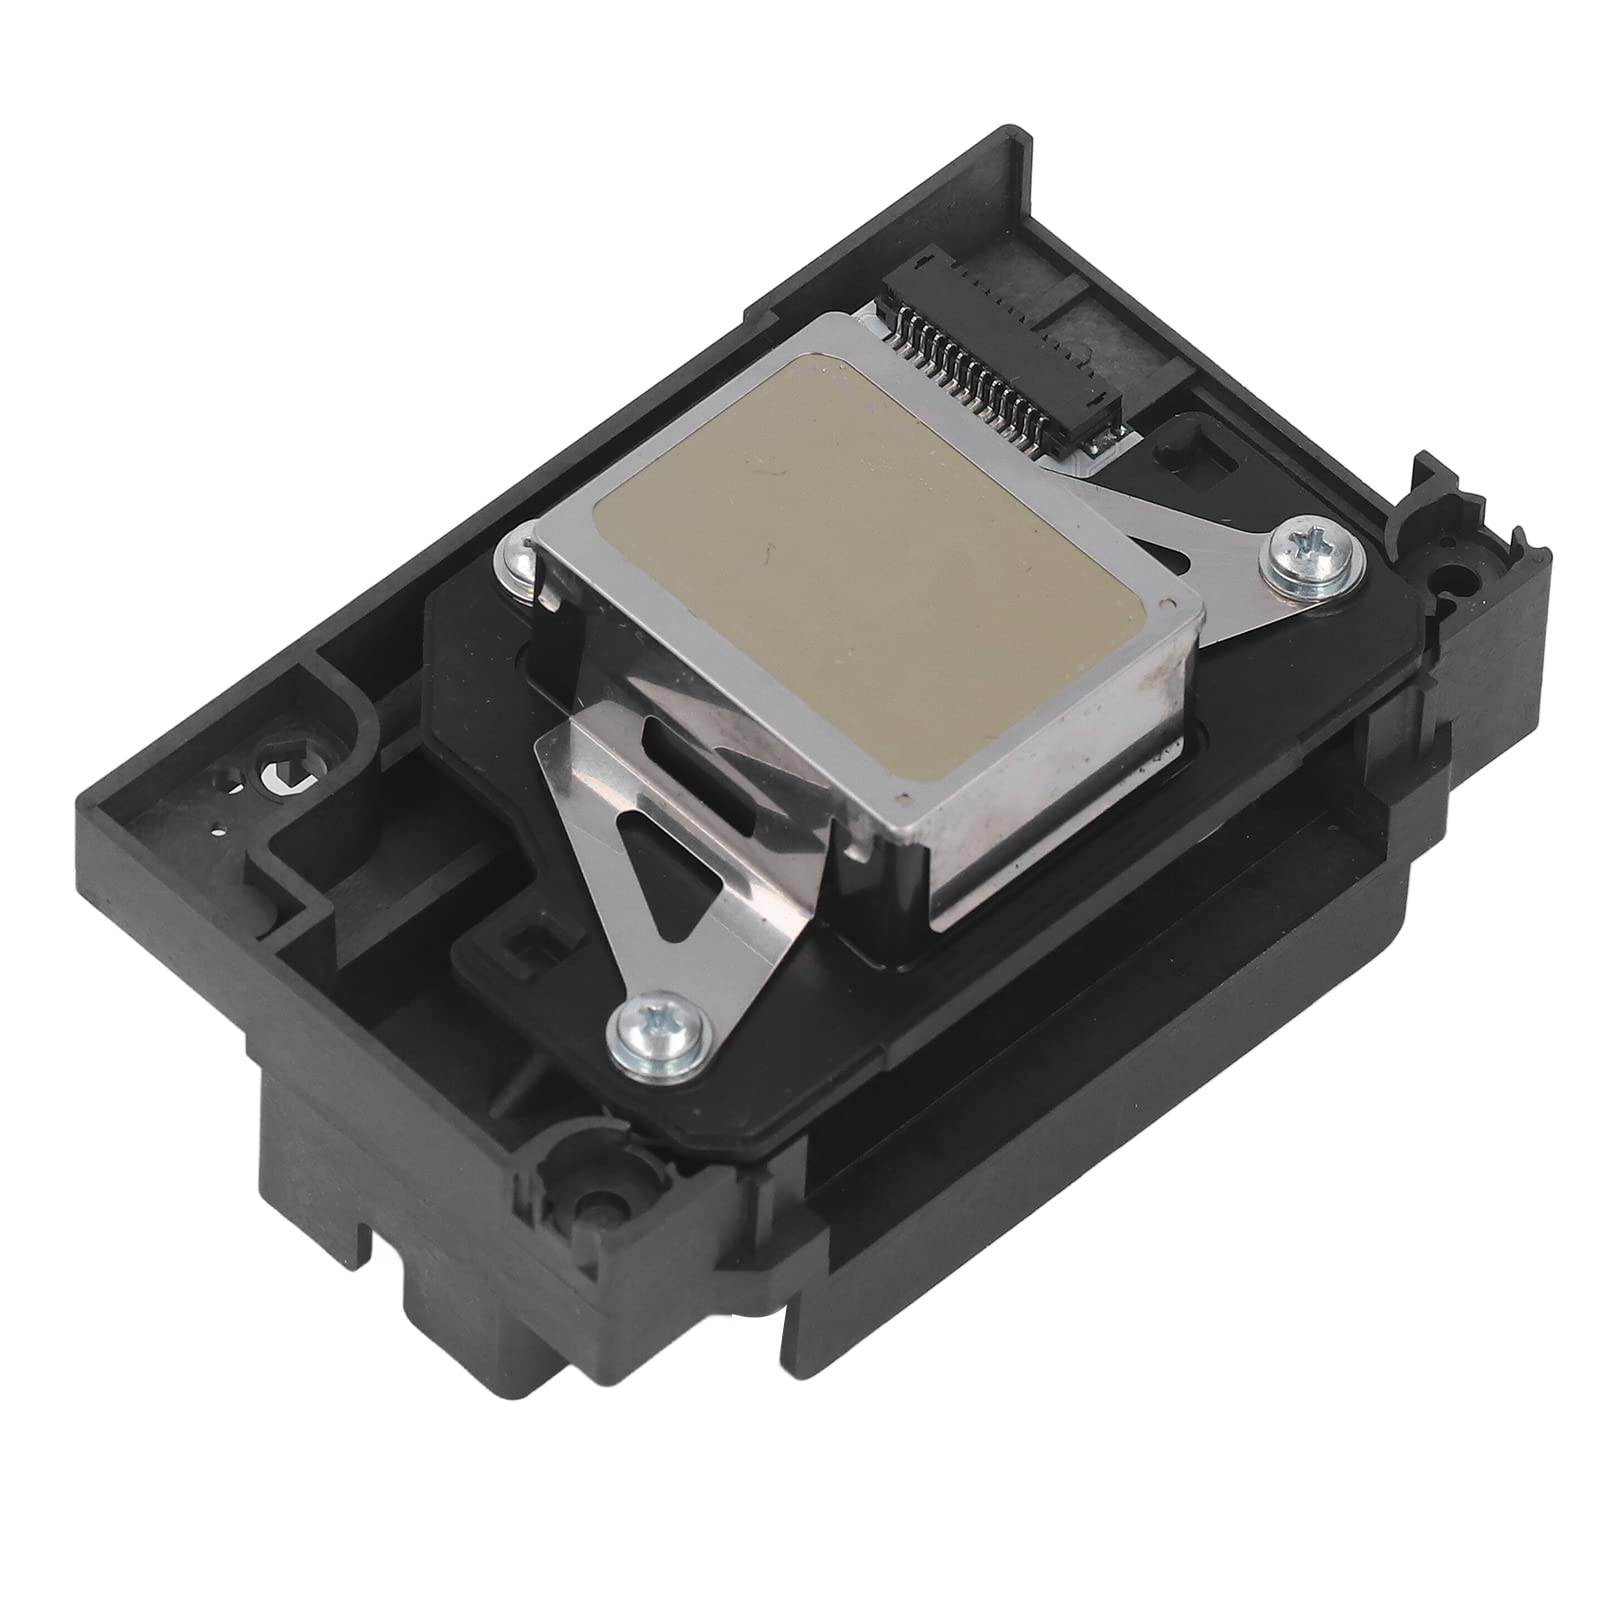 Printhead Replacement Clear Printing Printer Parts Accessories for R290 L801 L800 L805 TX650 T50 R330